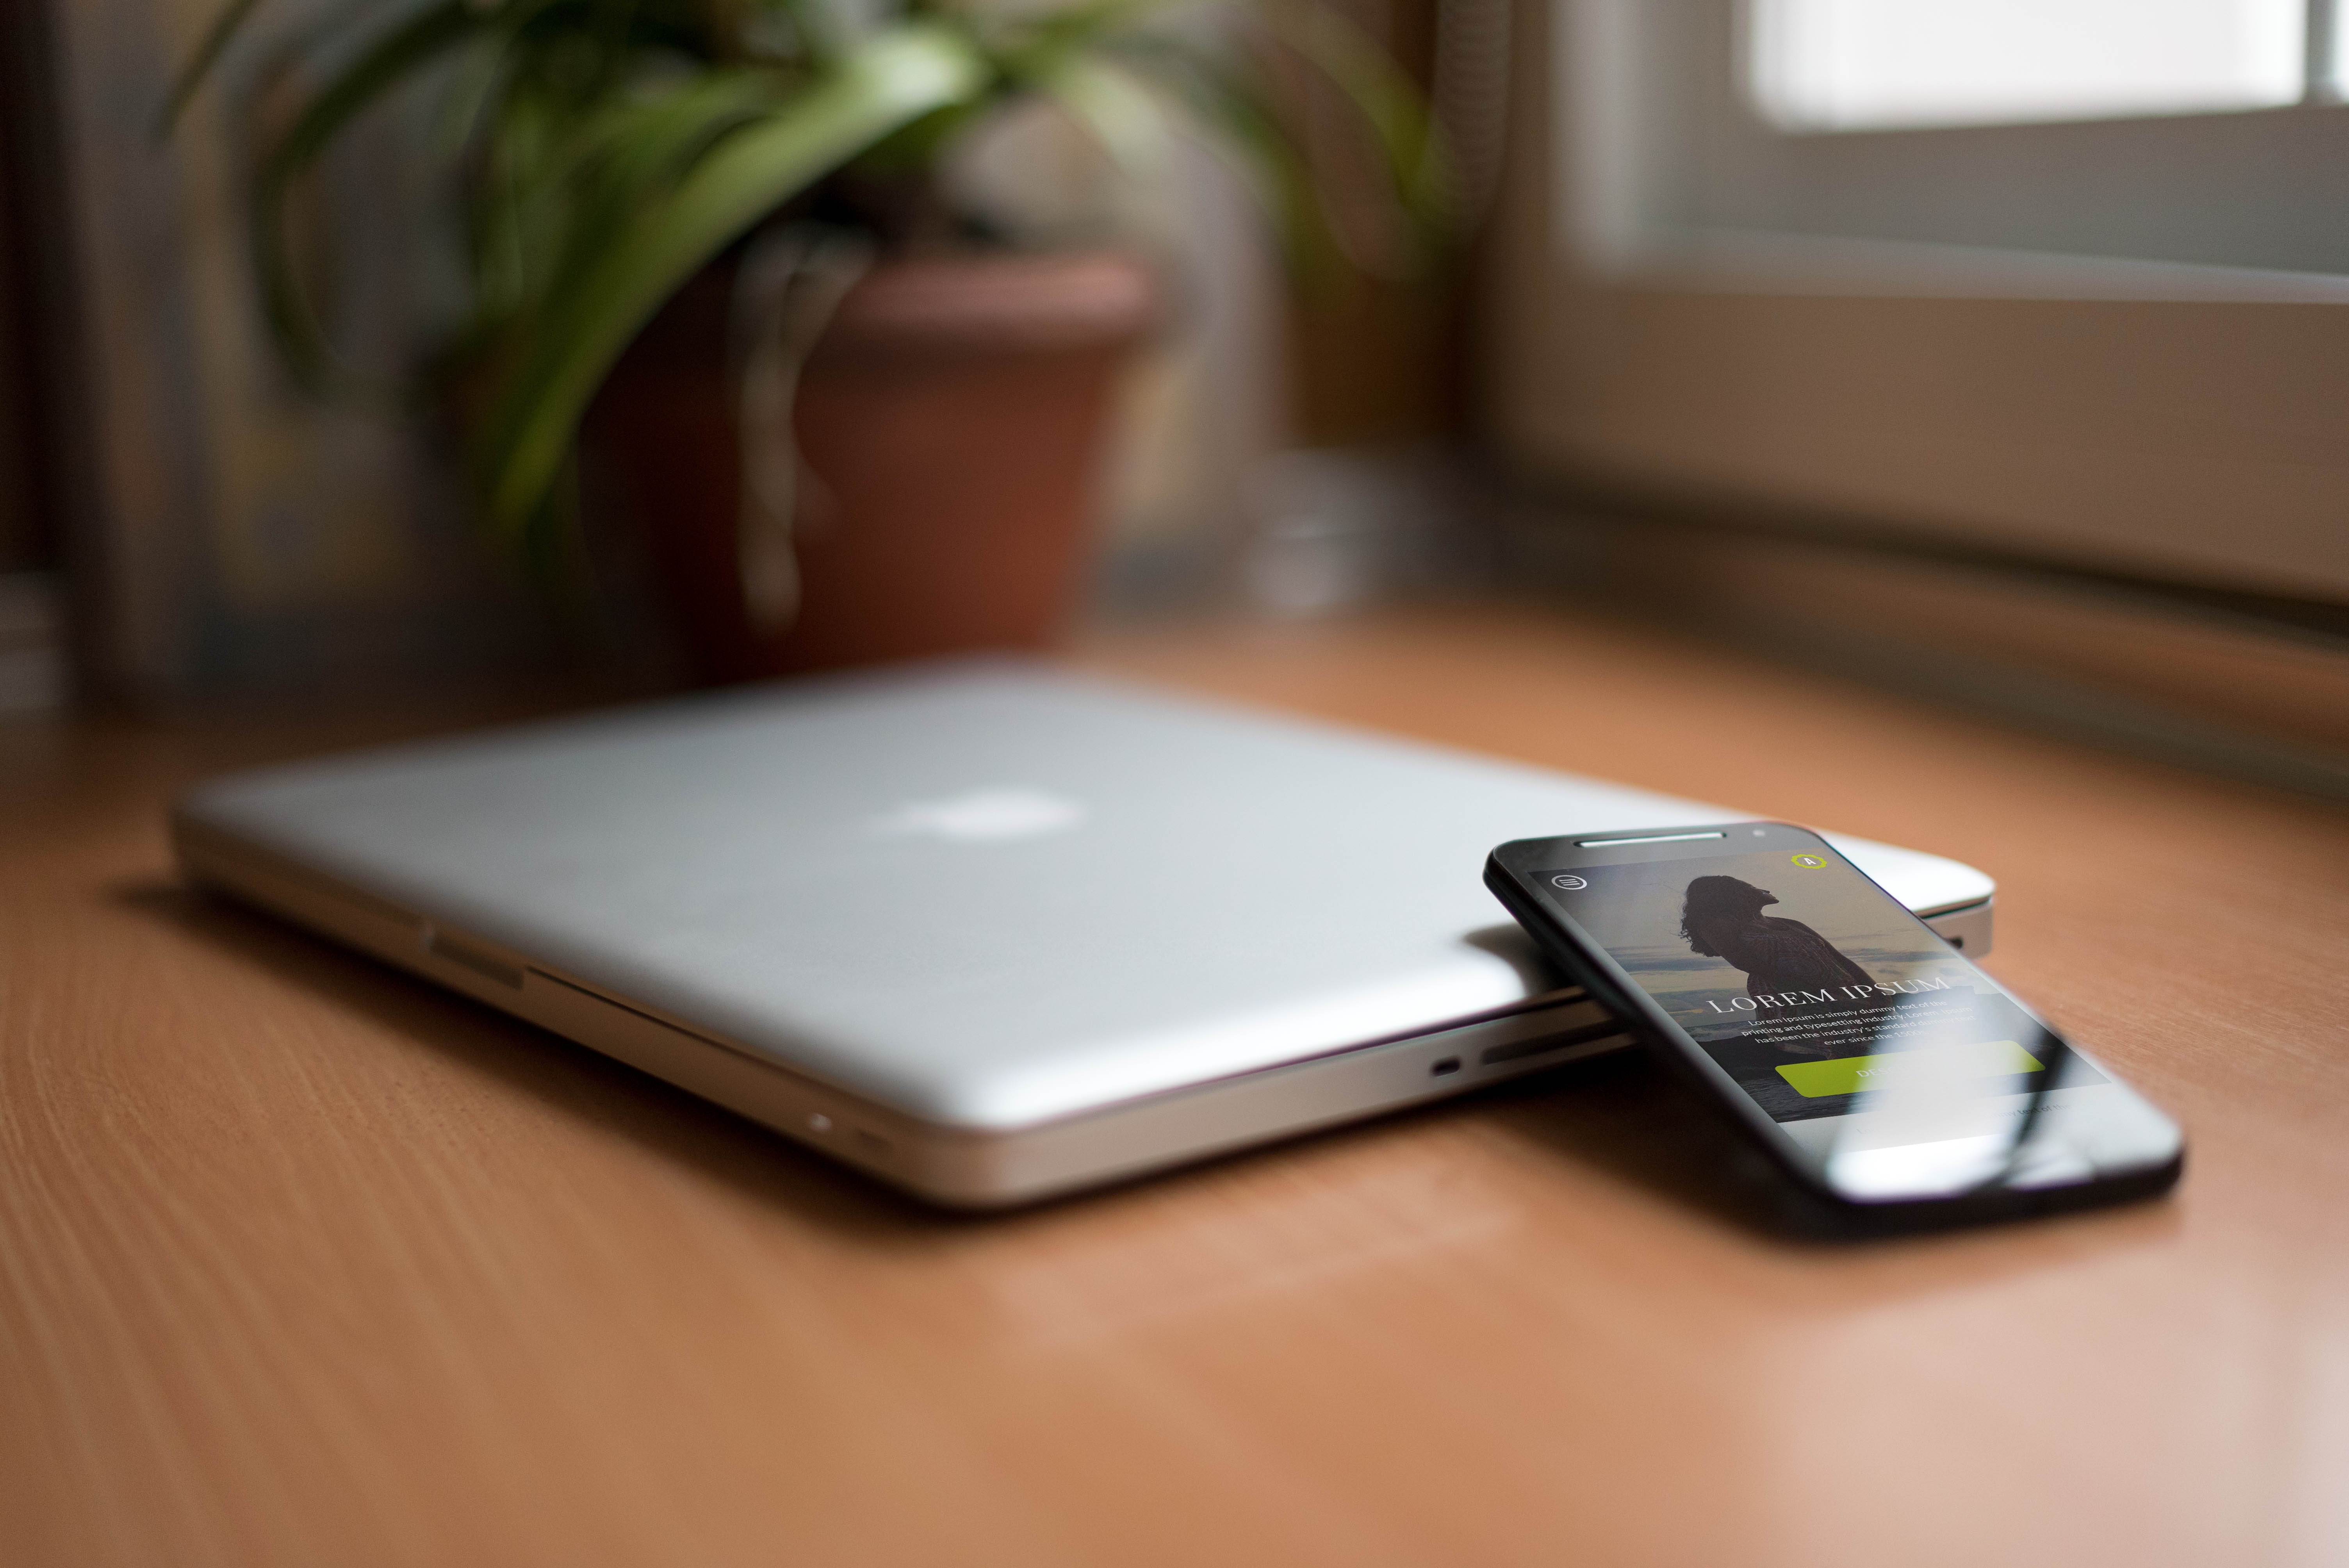 Smartphone beside silver macbook on brown wooden table with potted plant in the background photo